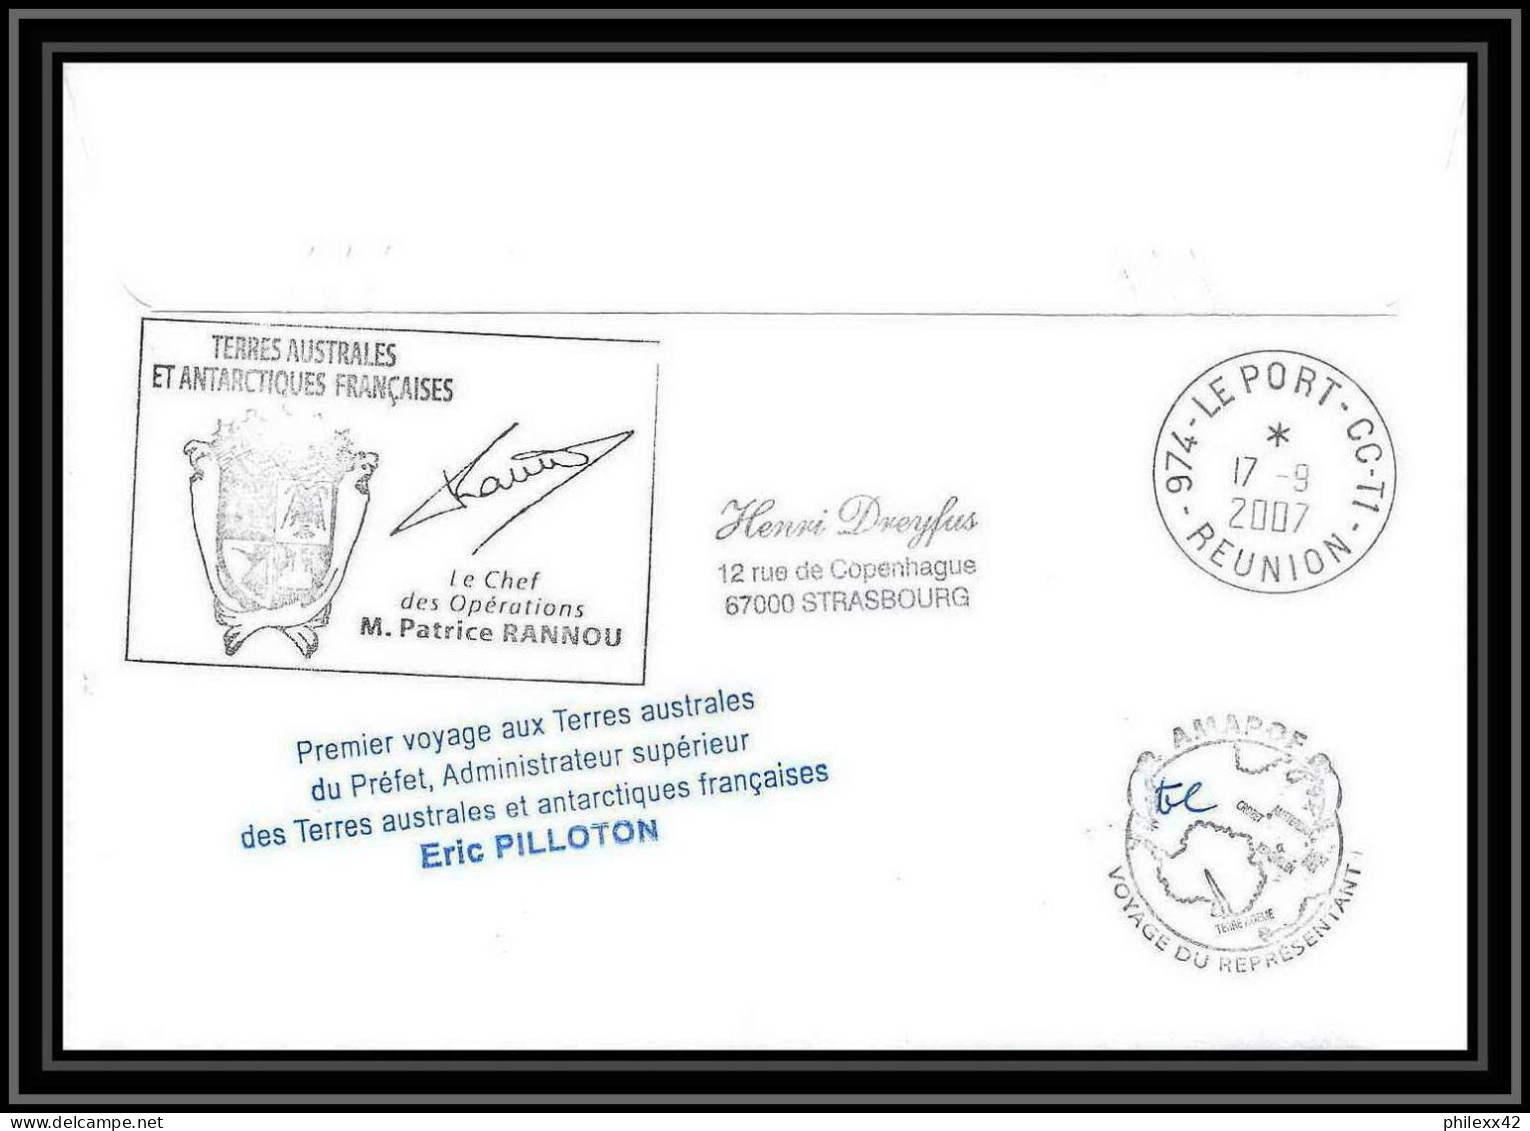 2717 ANTARCTIC Terres Australes TAAF Lettre Cover Dufresne 2 Signé Signed Op 2007/2 N°461 1er Voyage Pilloton Helilagon - Lettres & Documents